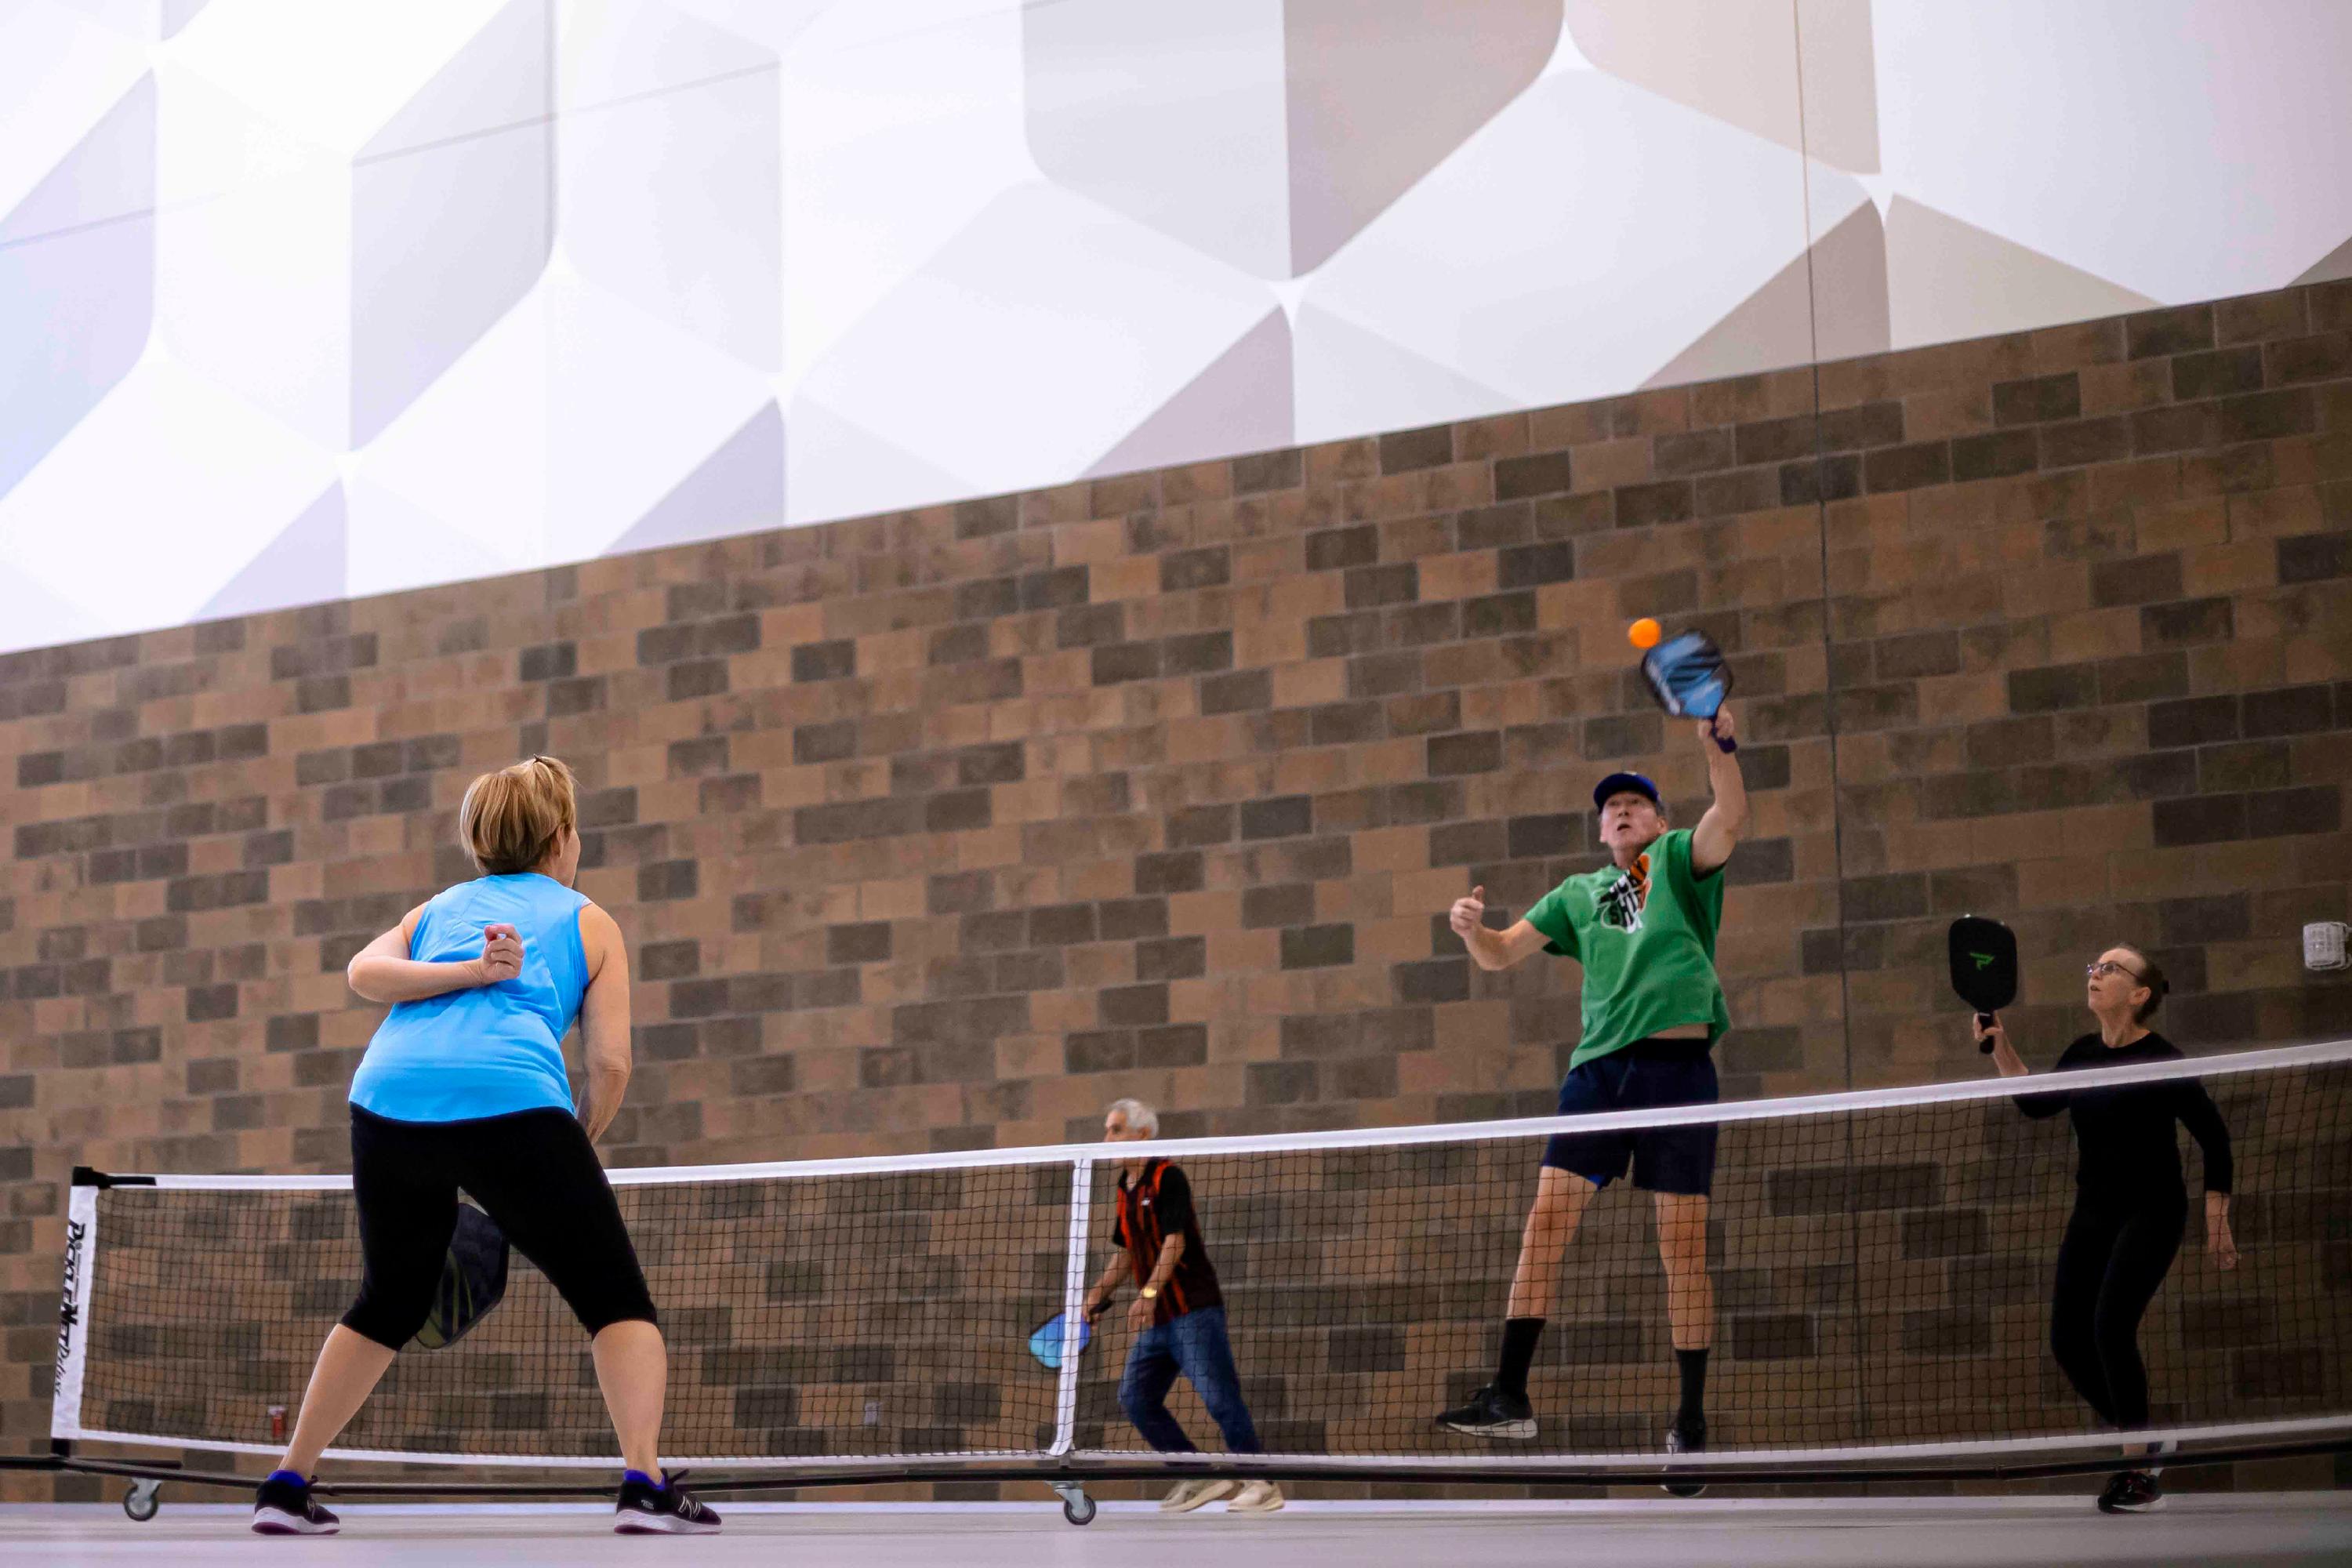 Three adults play pickleball at the Maryland Heights Community Center